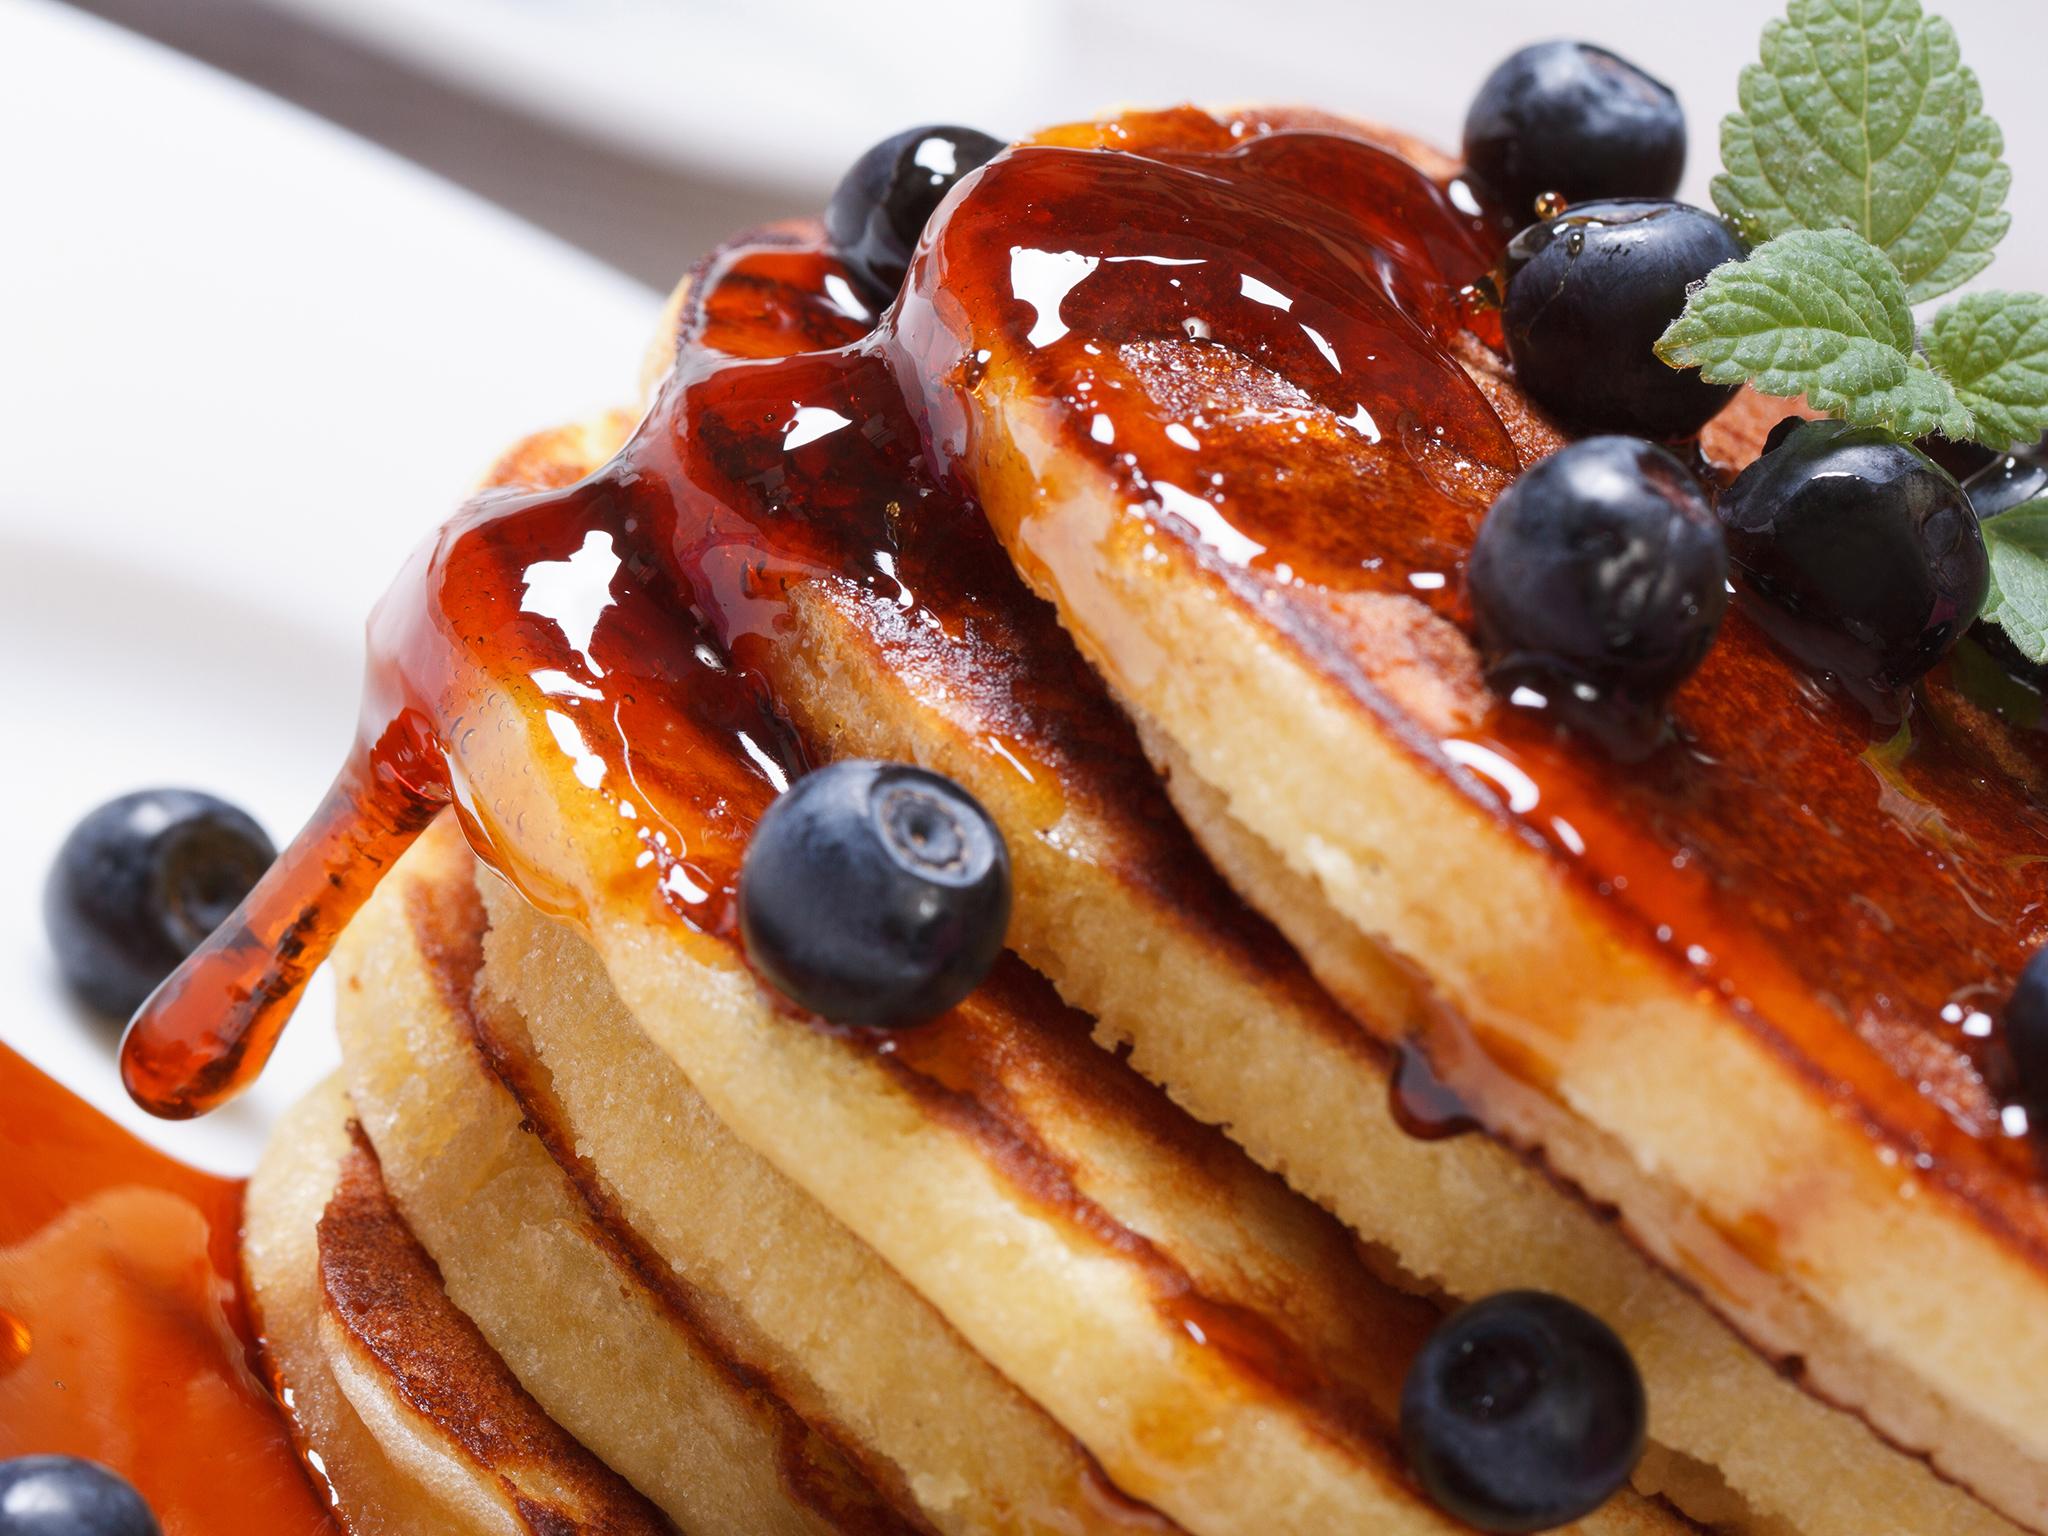 Pancakes covered in syrup are a poor choice for breakfast